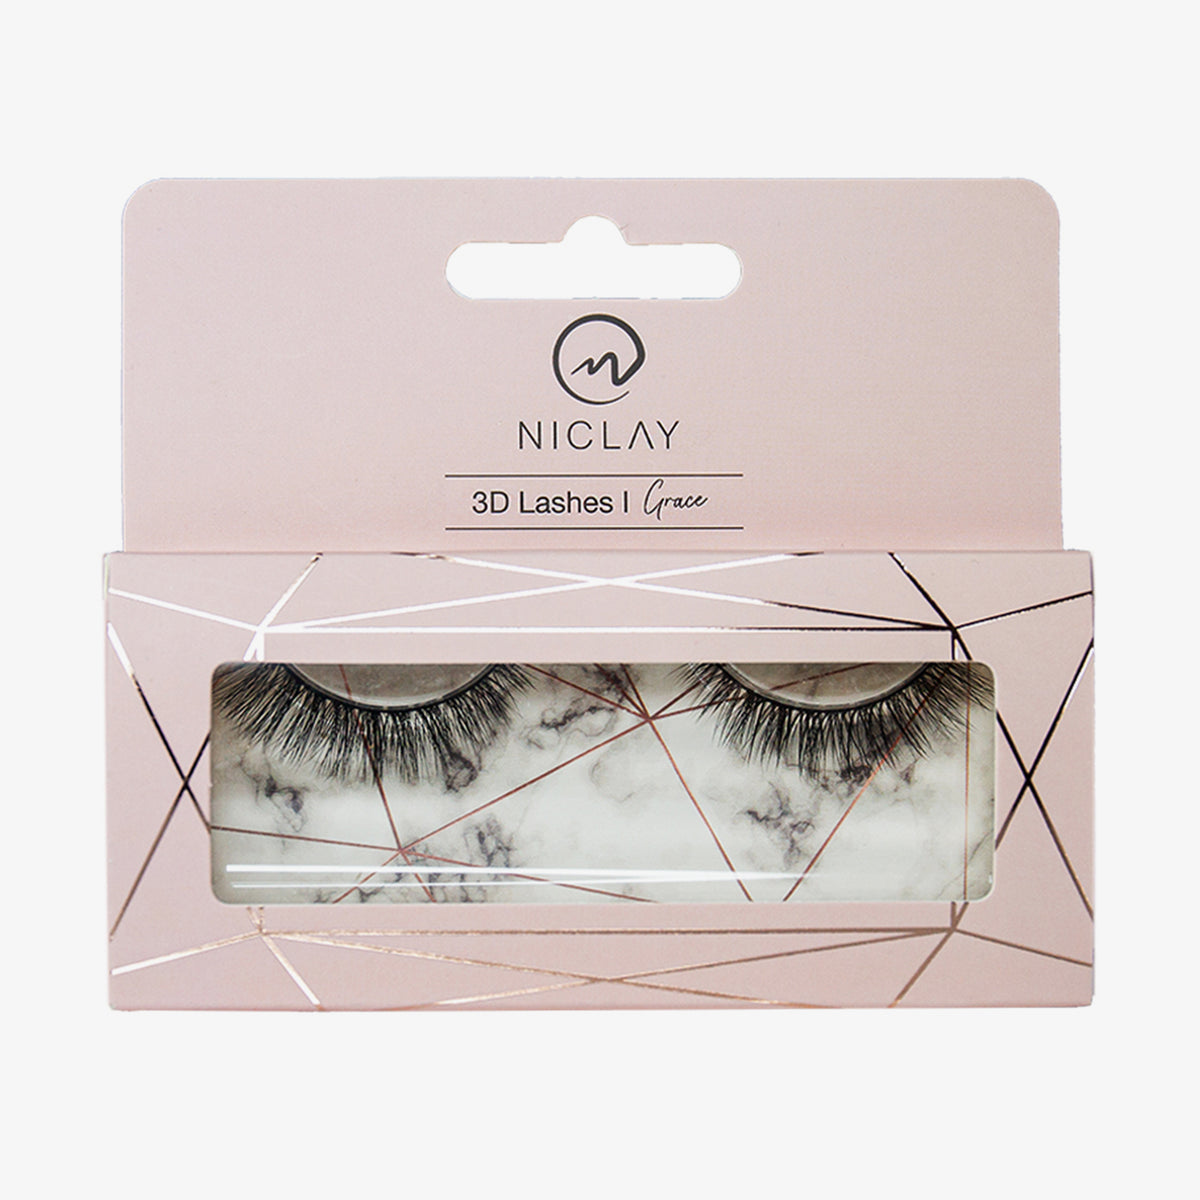 NICLAY | 3D Lashes Grace